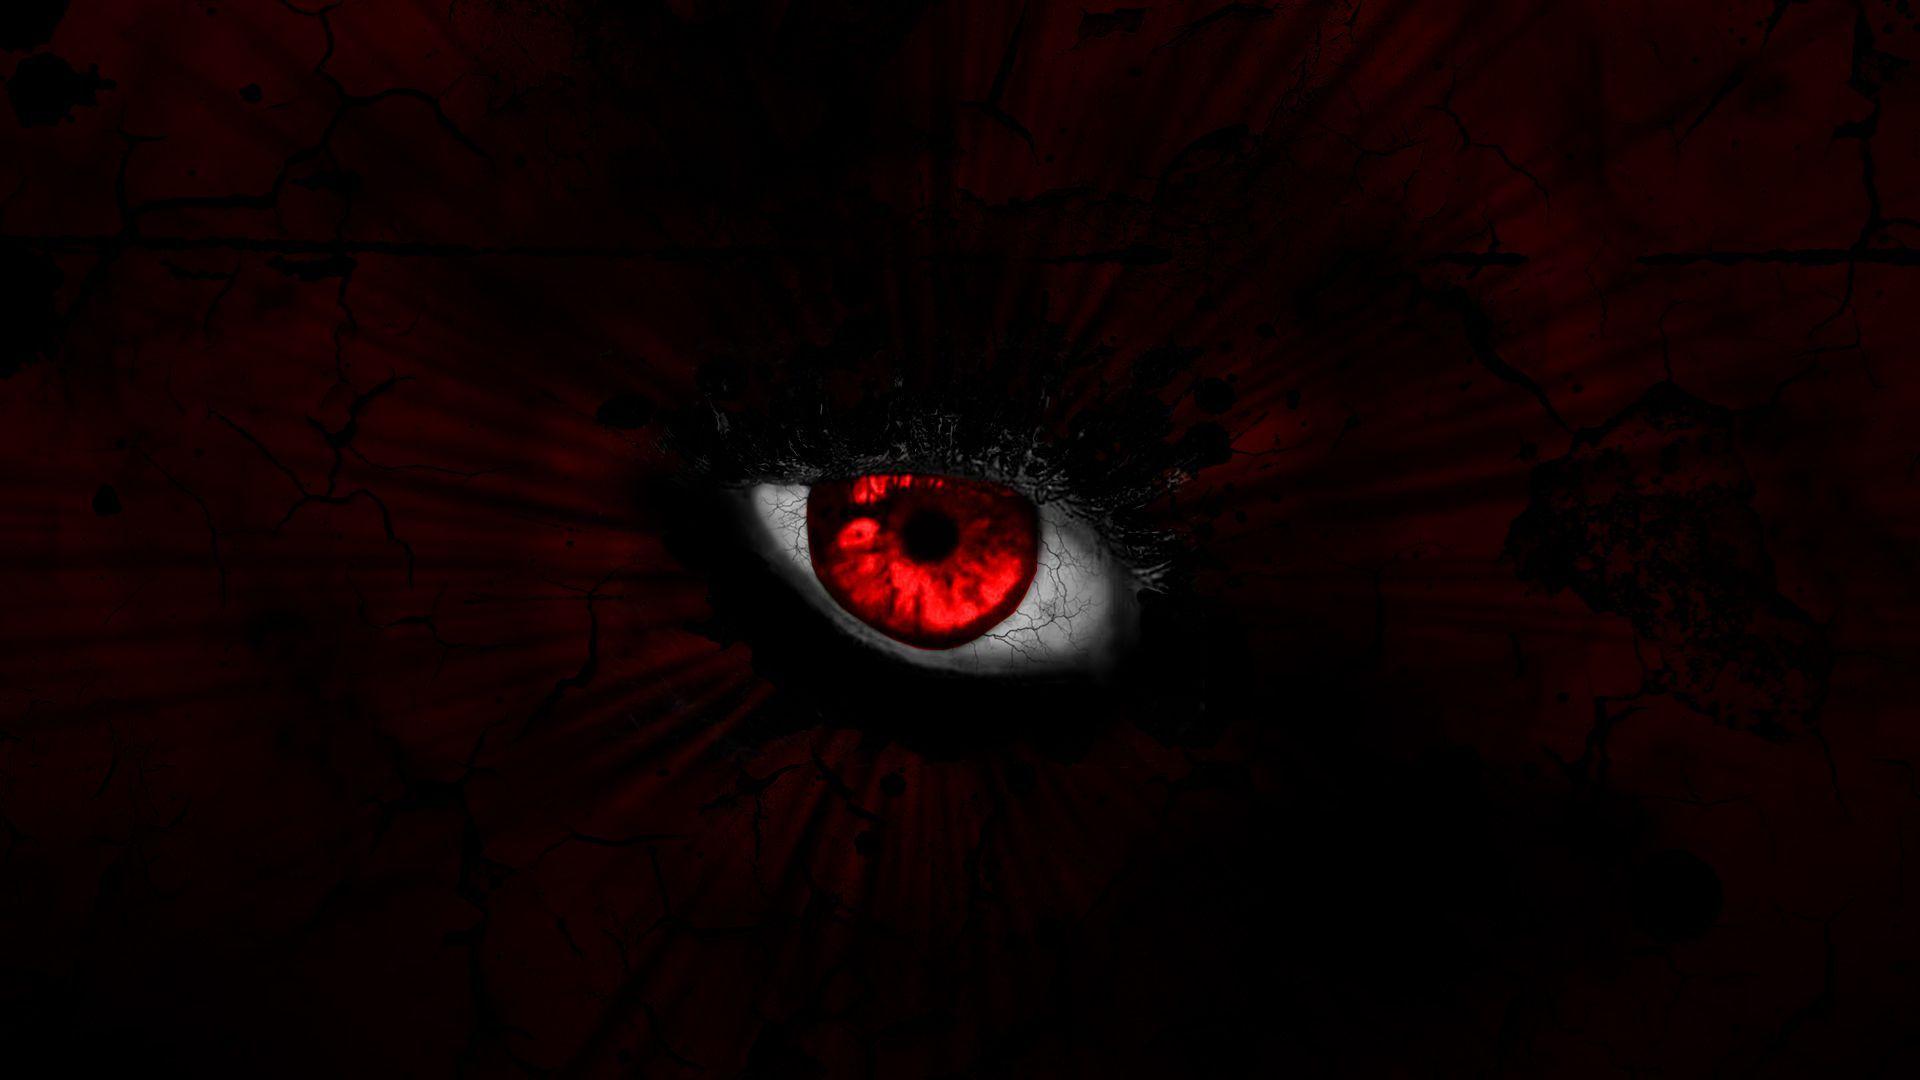 Download Eyes: The Horror Game wallpapers for mobile phone, free